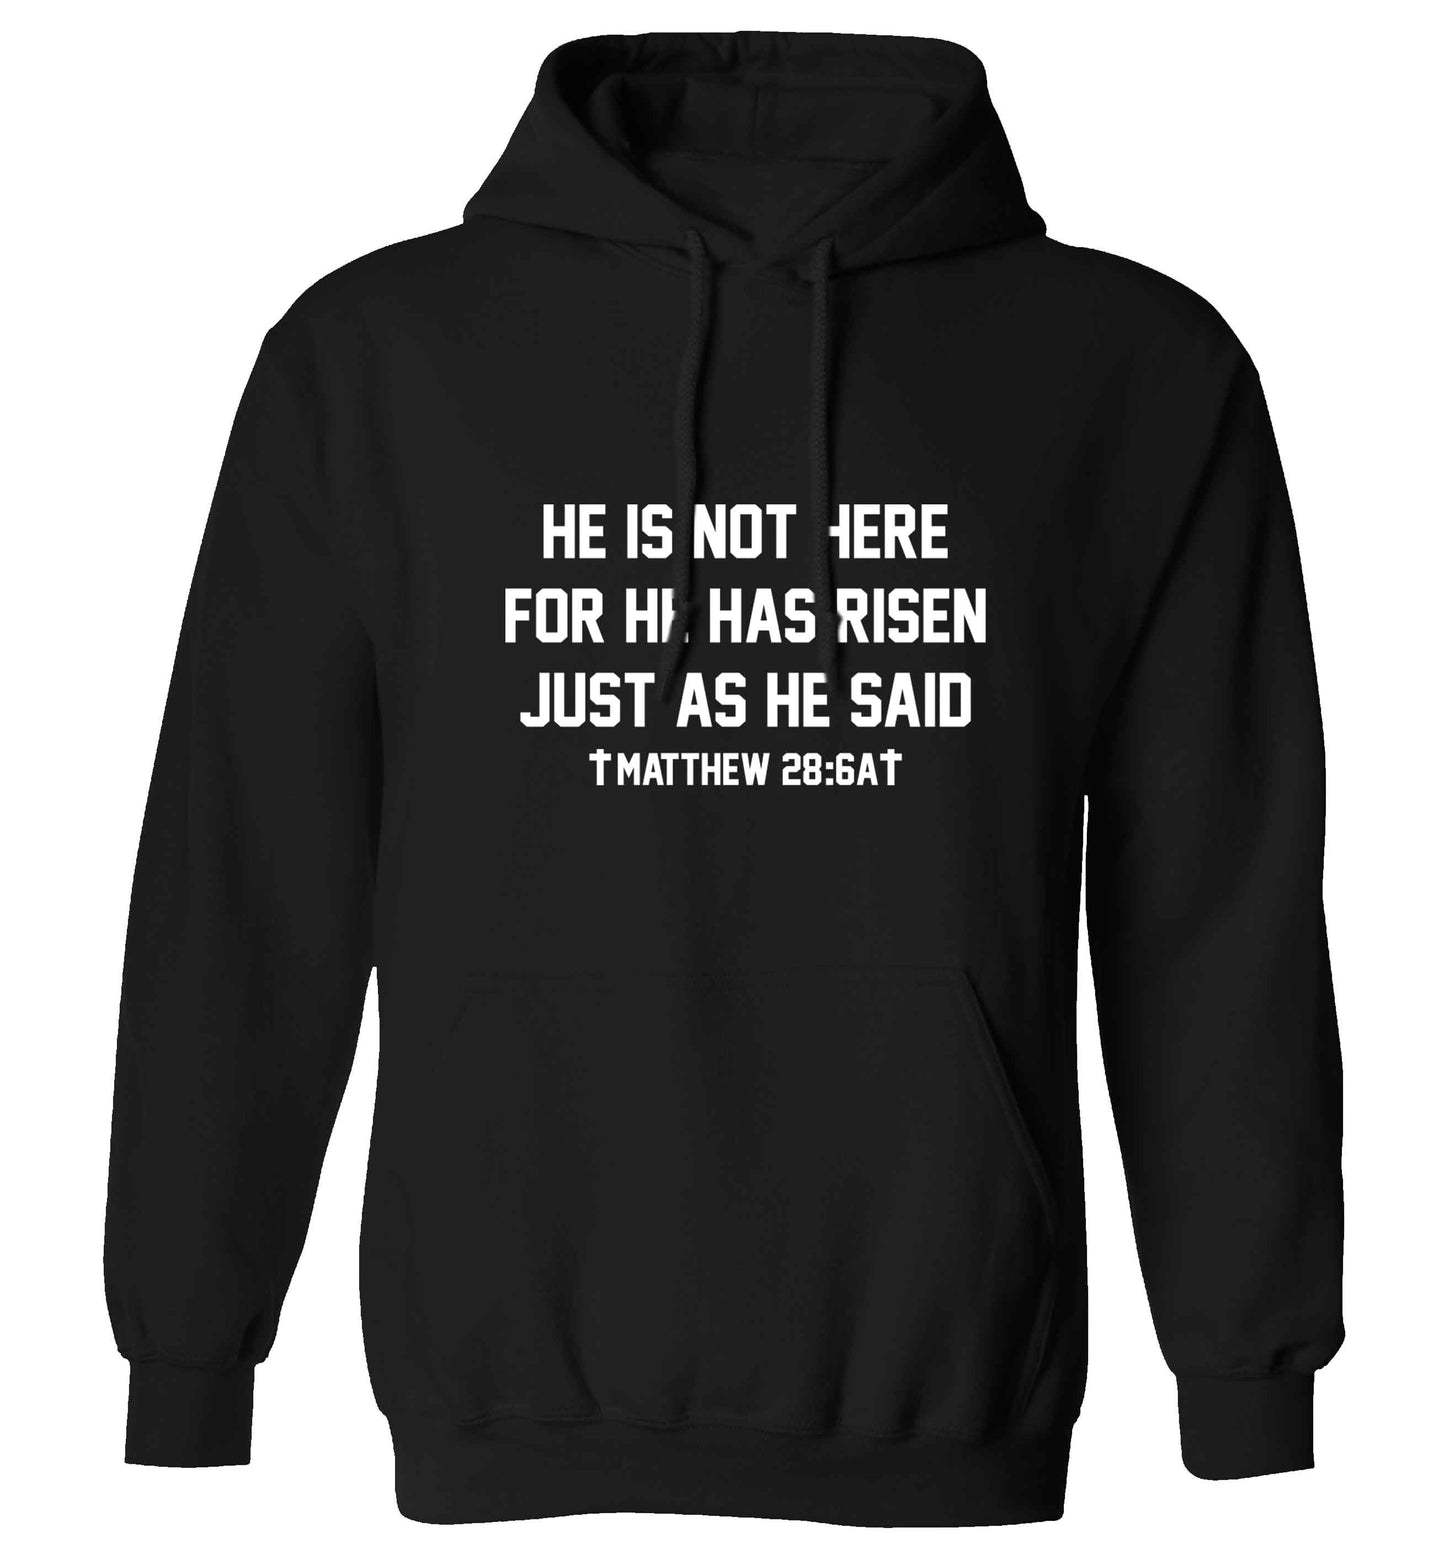 He is not here for he has risen just as he said matthew 28:6A adults unisex black hoodie 2XL